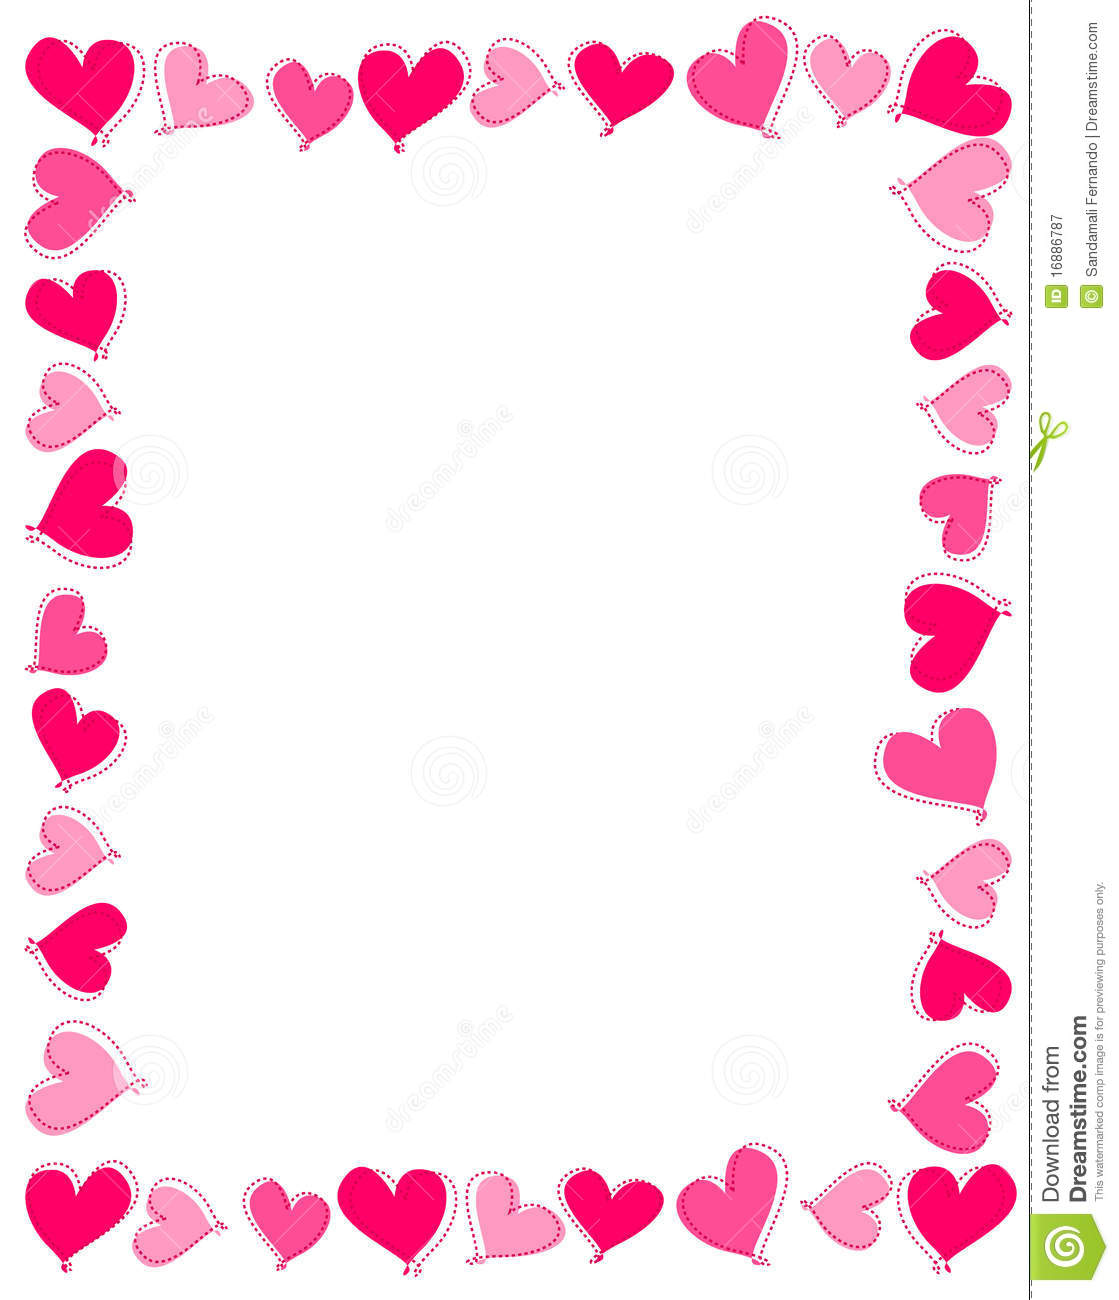 Download clipart heart border 20 free Cliparts | Download images on ...